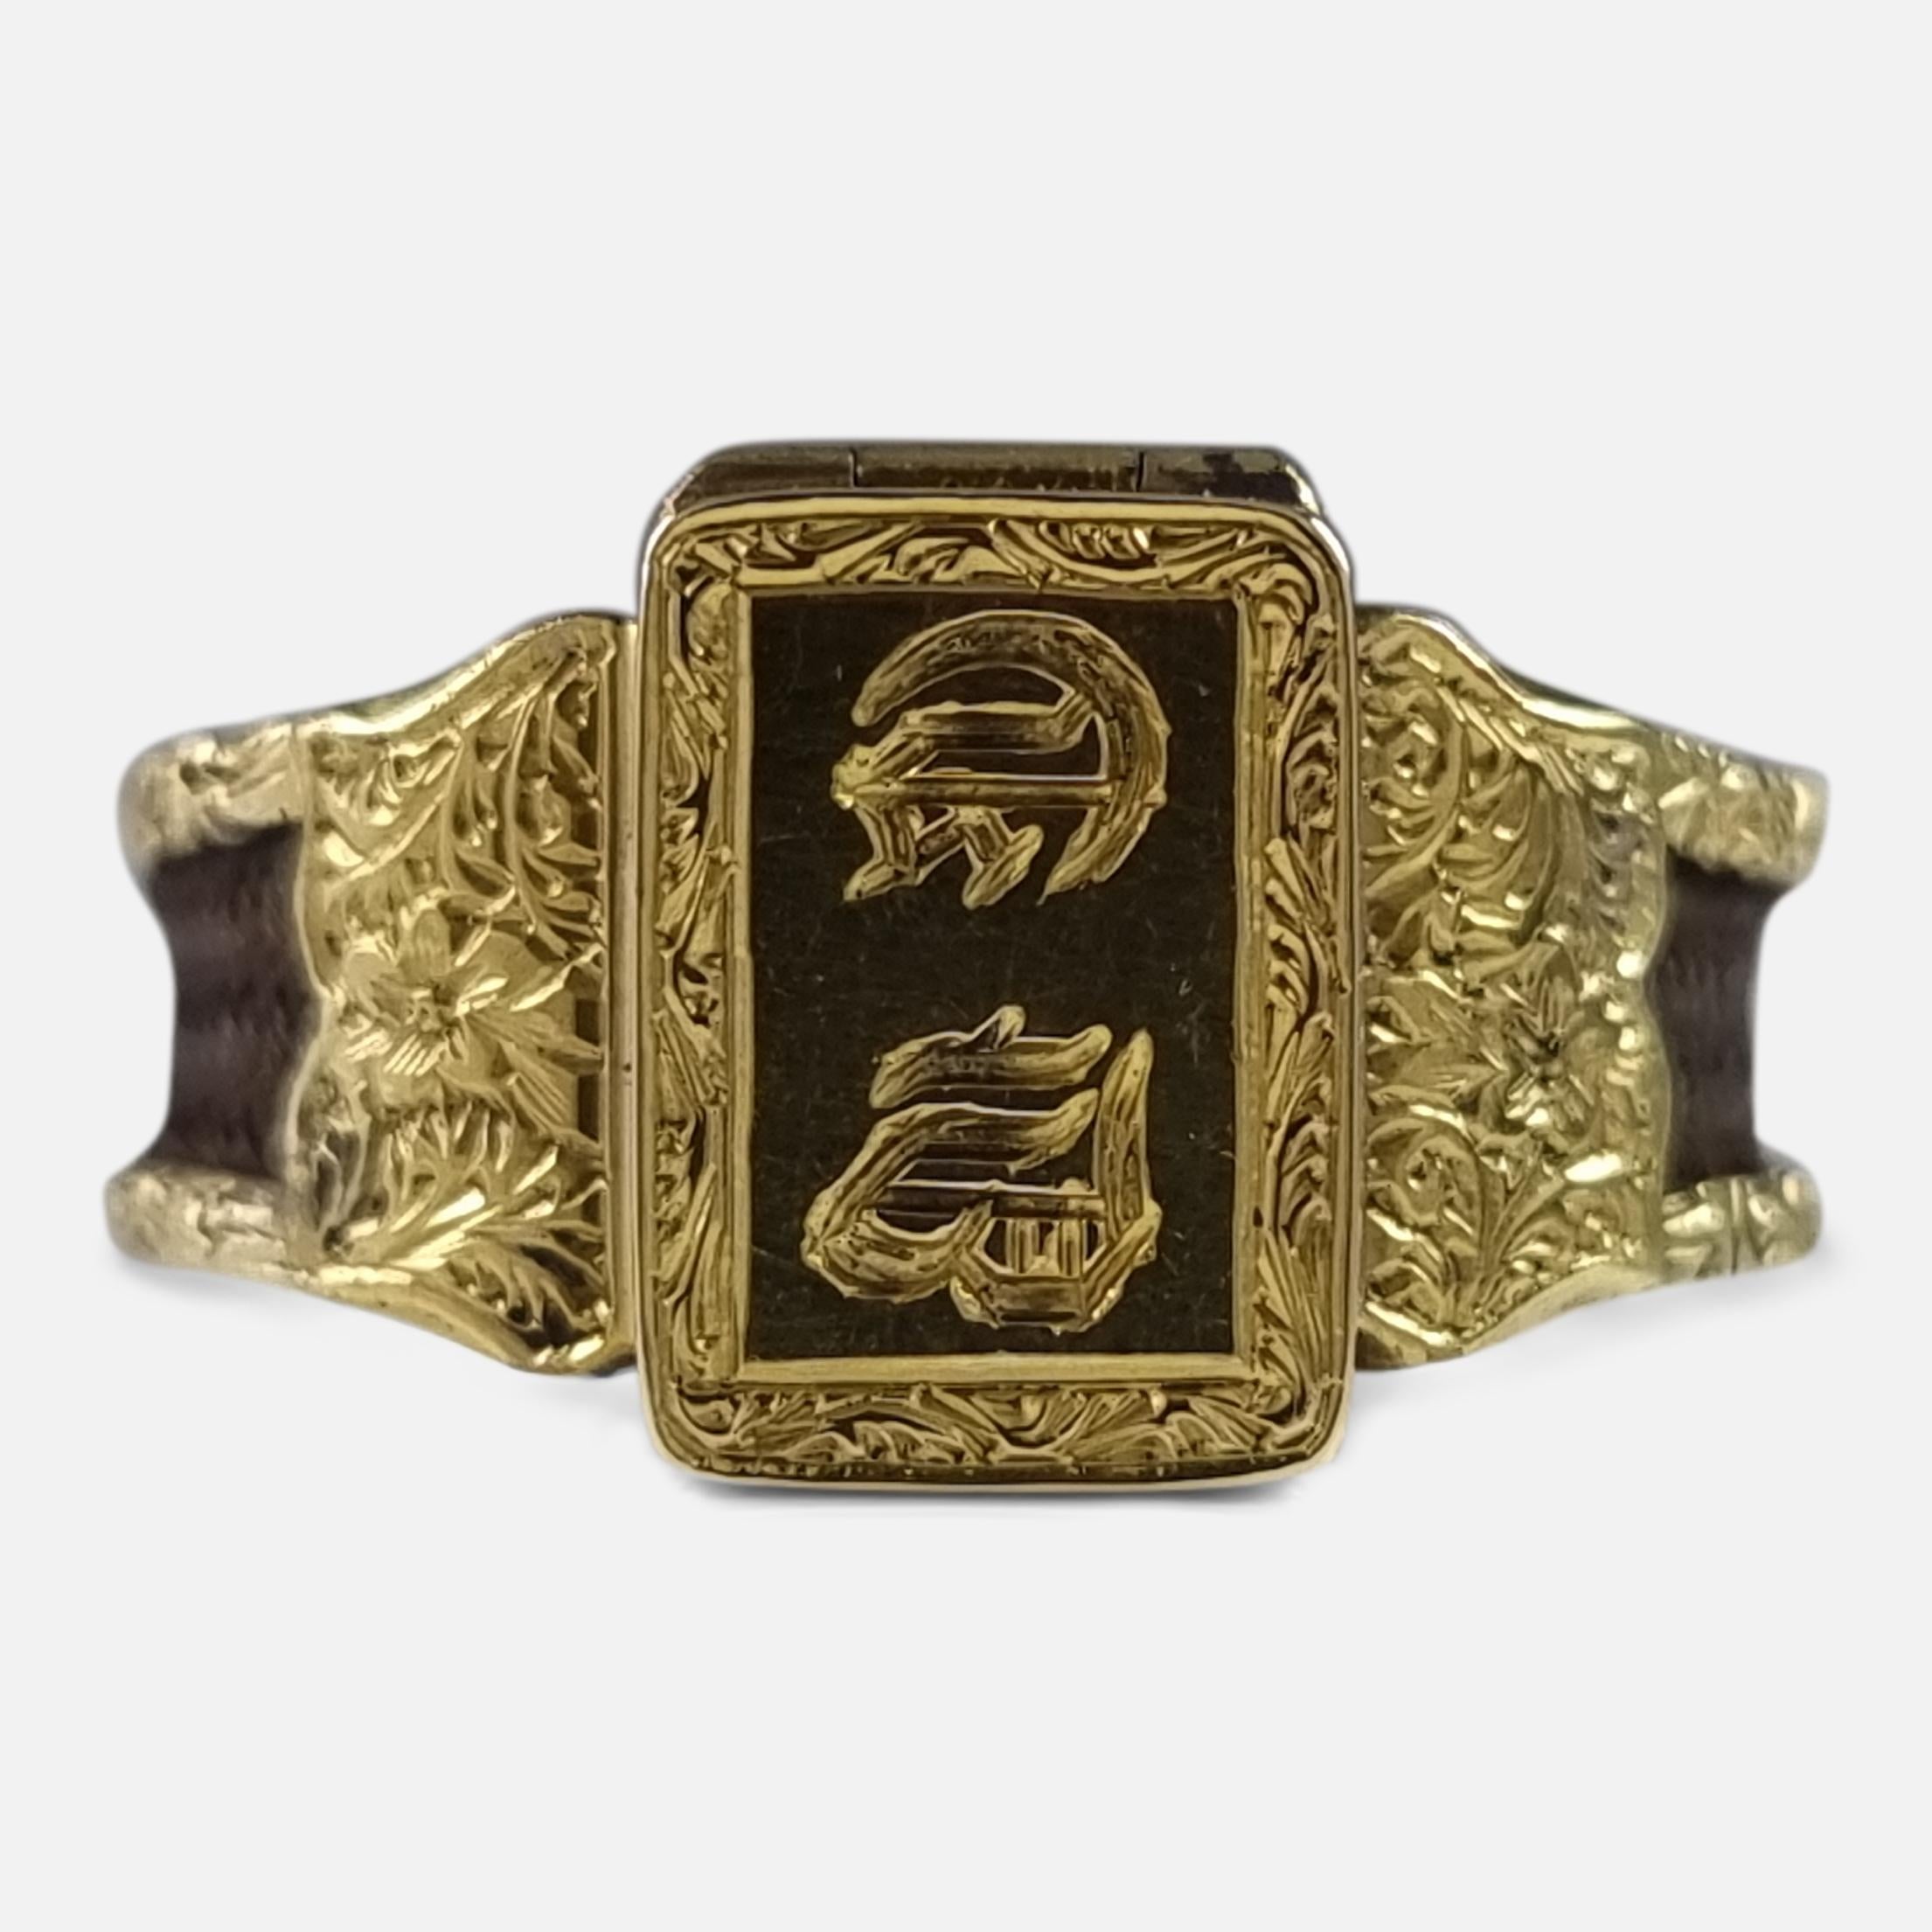 A Victorian 15 carat yellow gold sentimental memorial portrait hair-work ring. The ring has an engraved panel to the front with a pair of initials, which hinges open upwards to reveal a coloured portrait of a Victorian woman, leading to scrolling